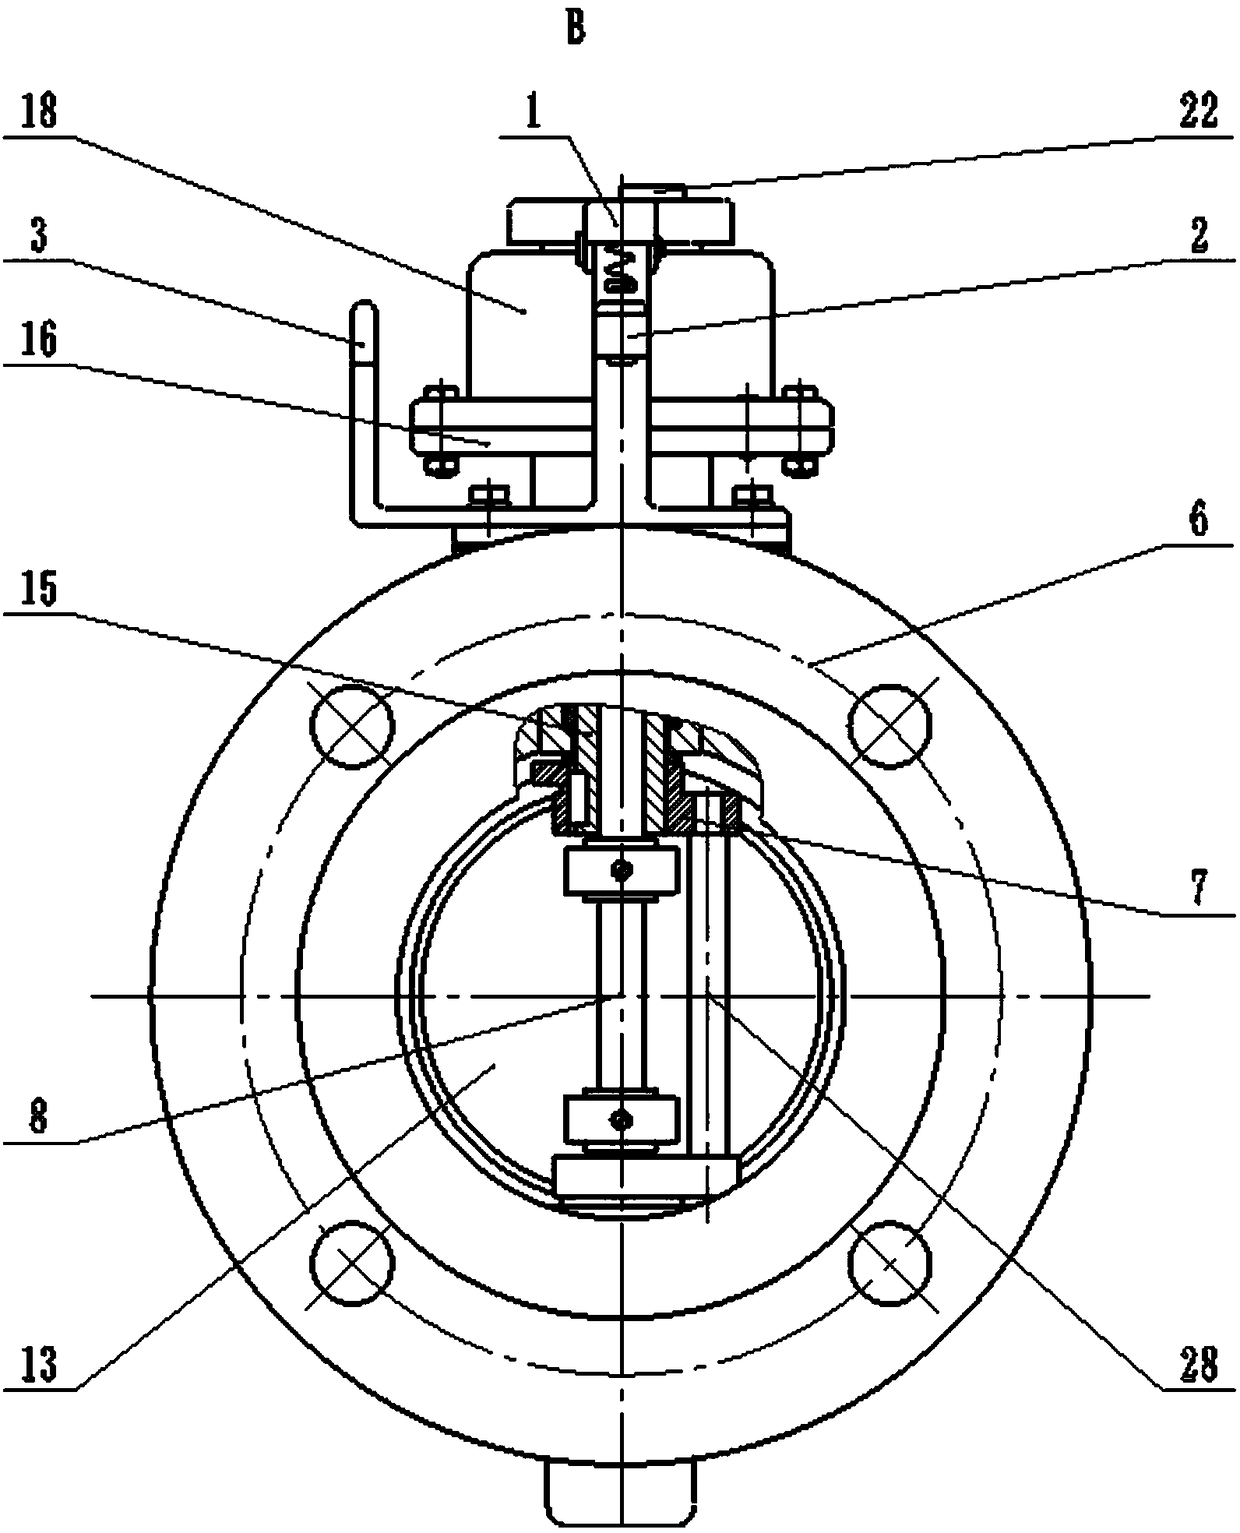 An intermittently driven non-abrasive hard-sealed butterfly valve